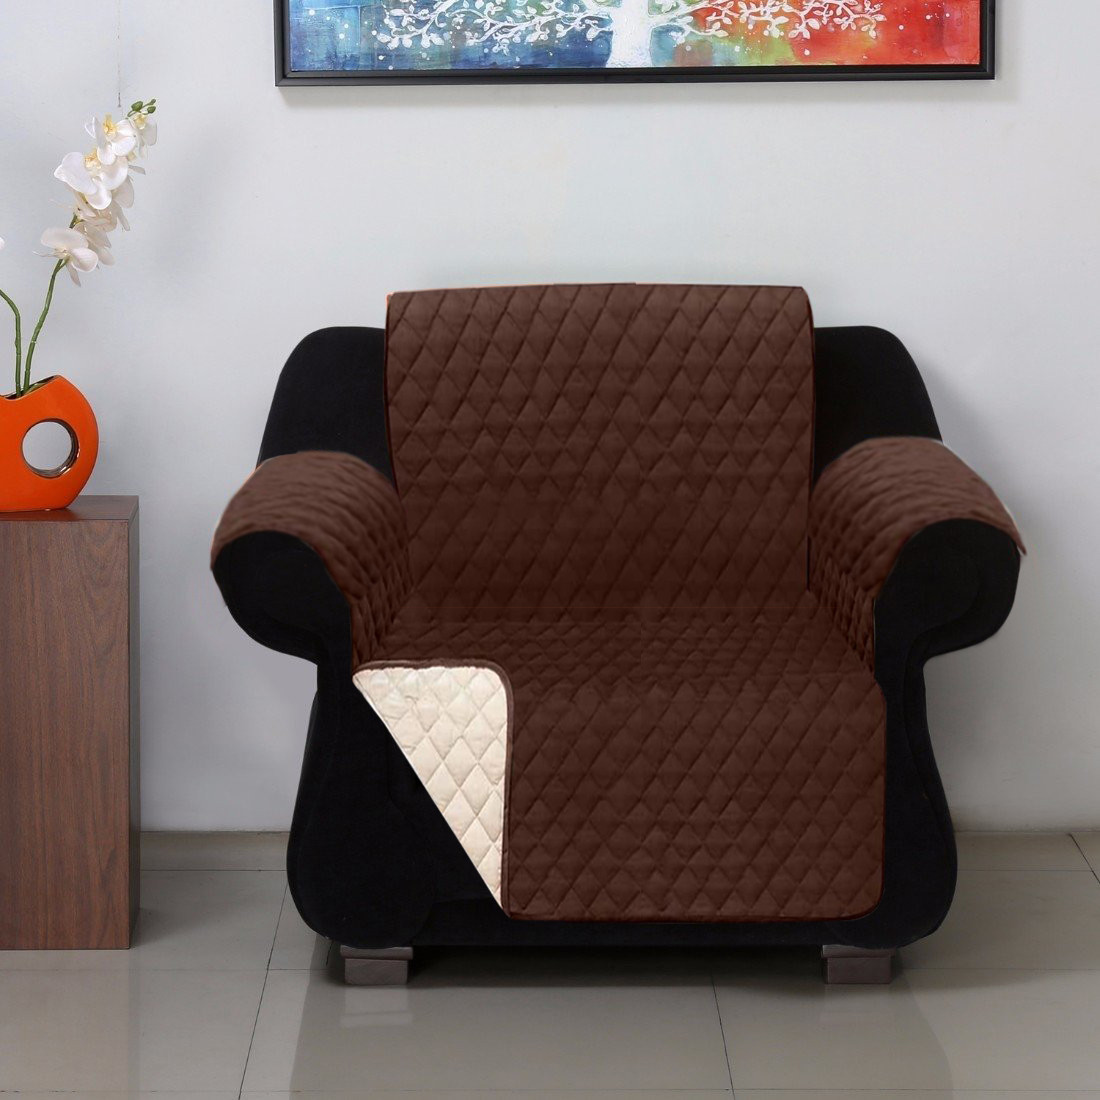 Kuber Industries Reversible 1 Seater Polyester Sofa Cover for Living Room, Brown & Ivory